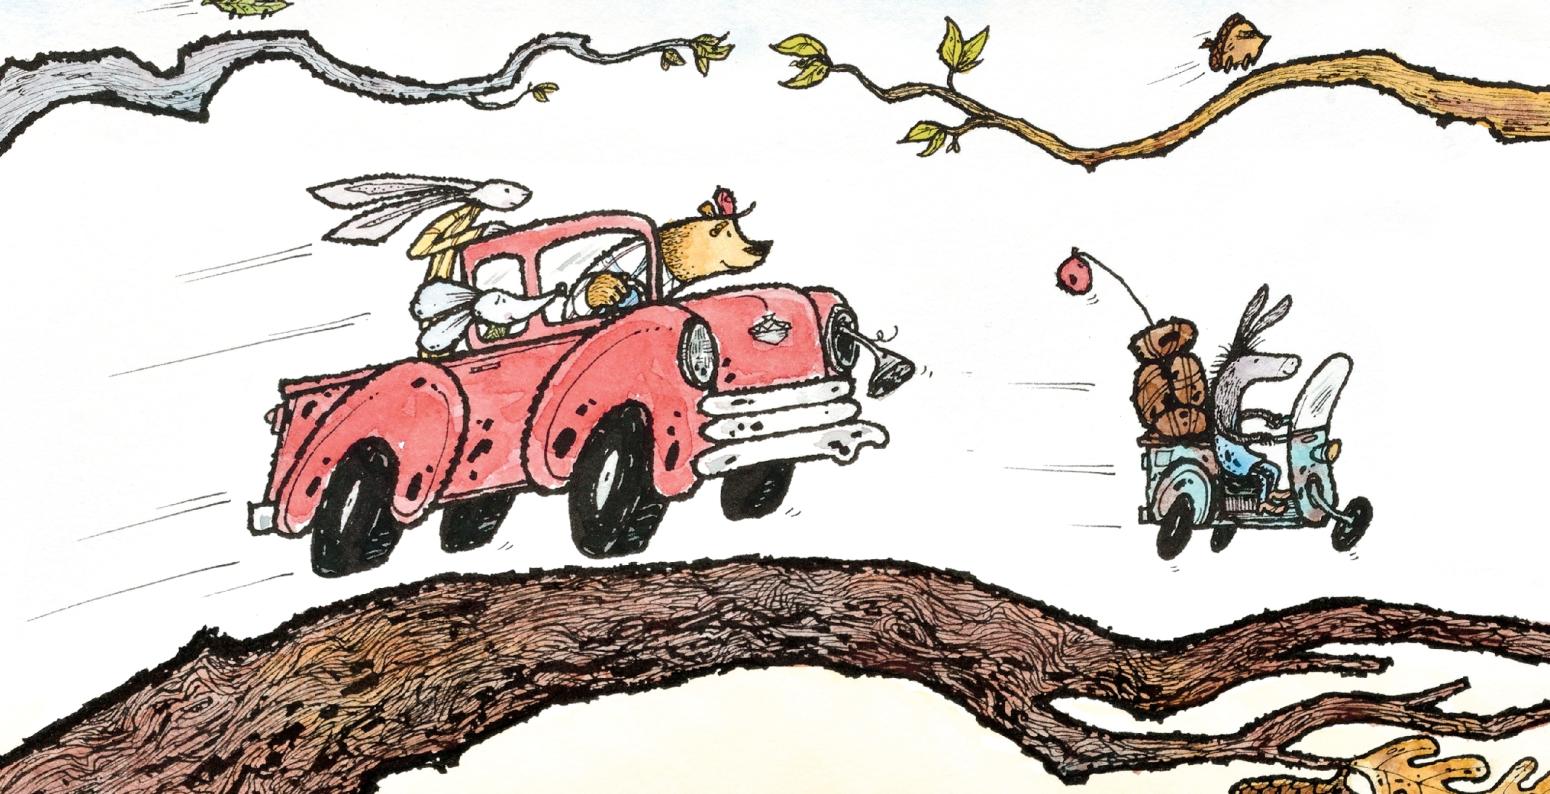 Book cover image of animals in cars, driving across a tree branch.